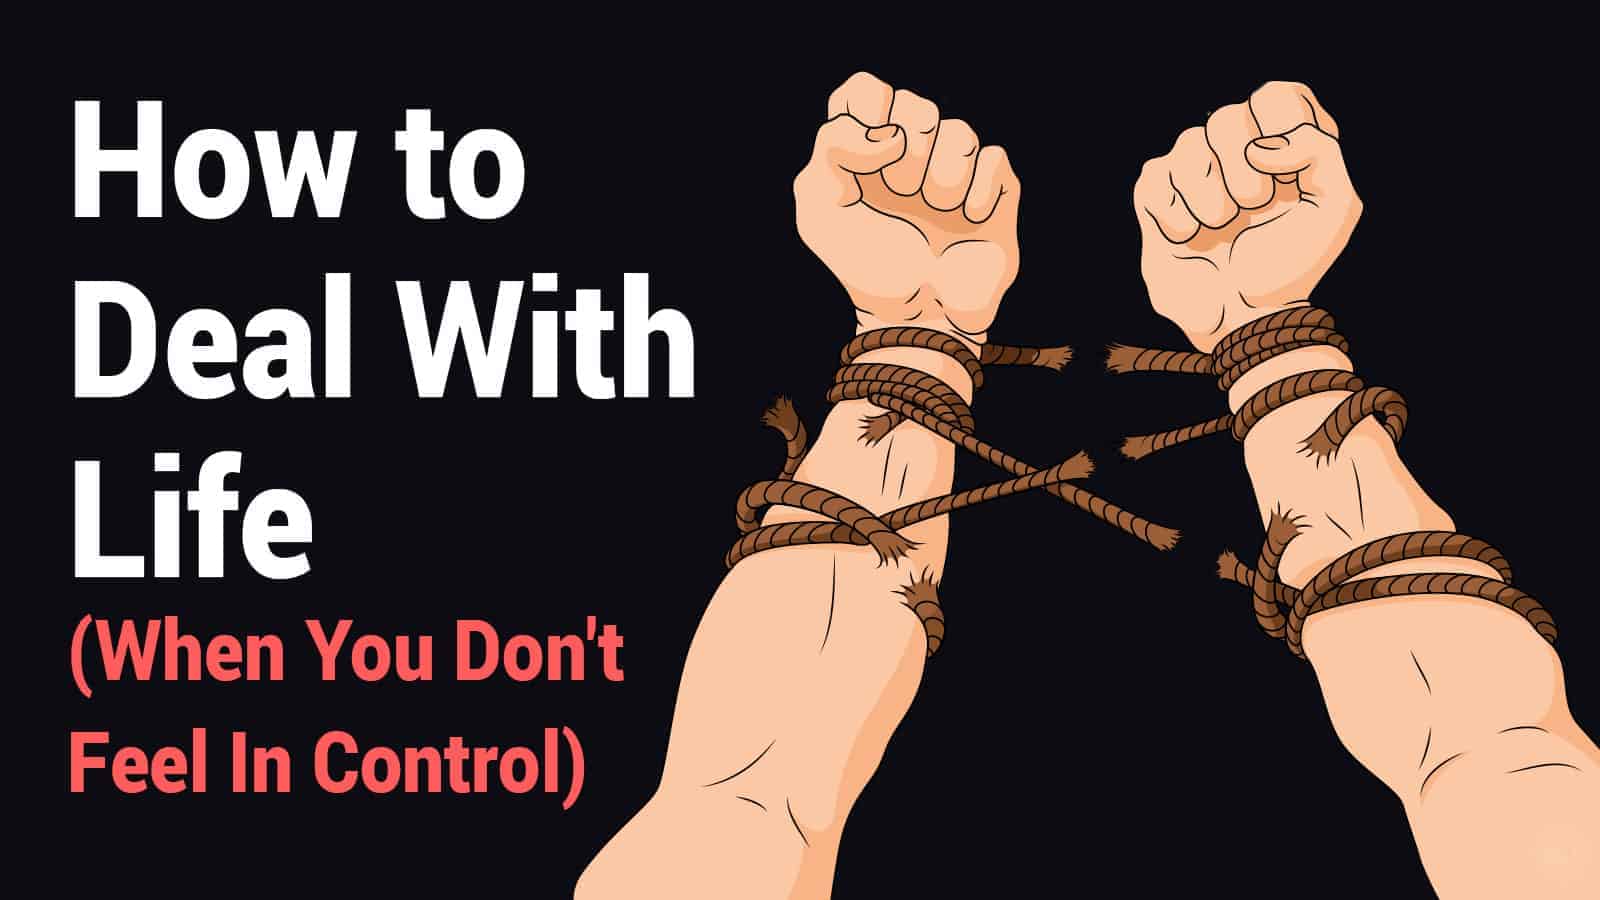 How to Deal With Life (When You Don’t Feel In Control)